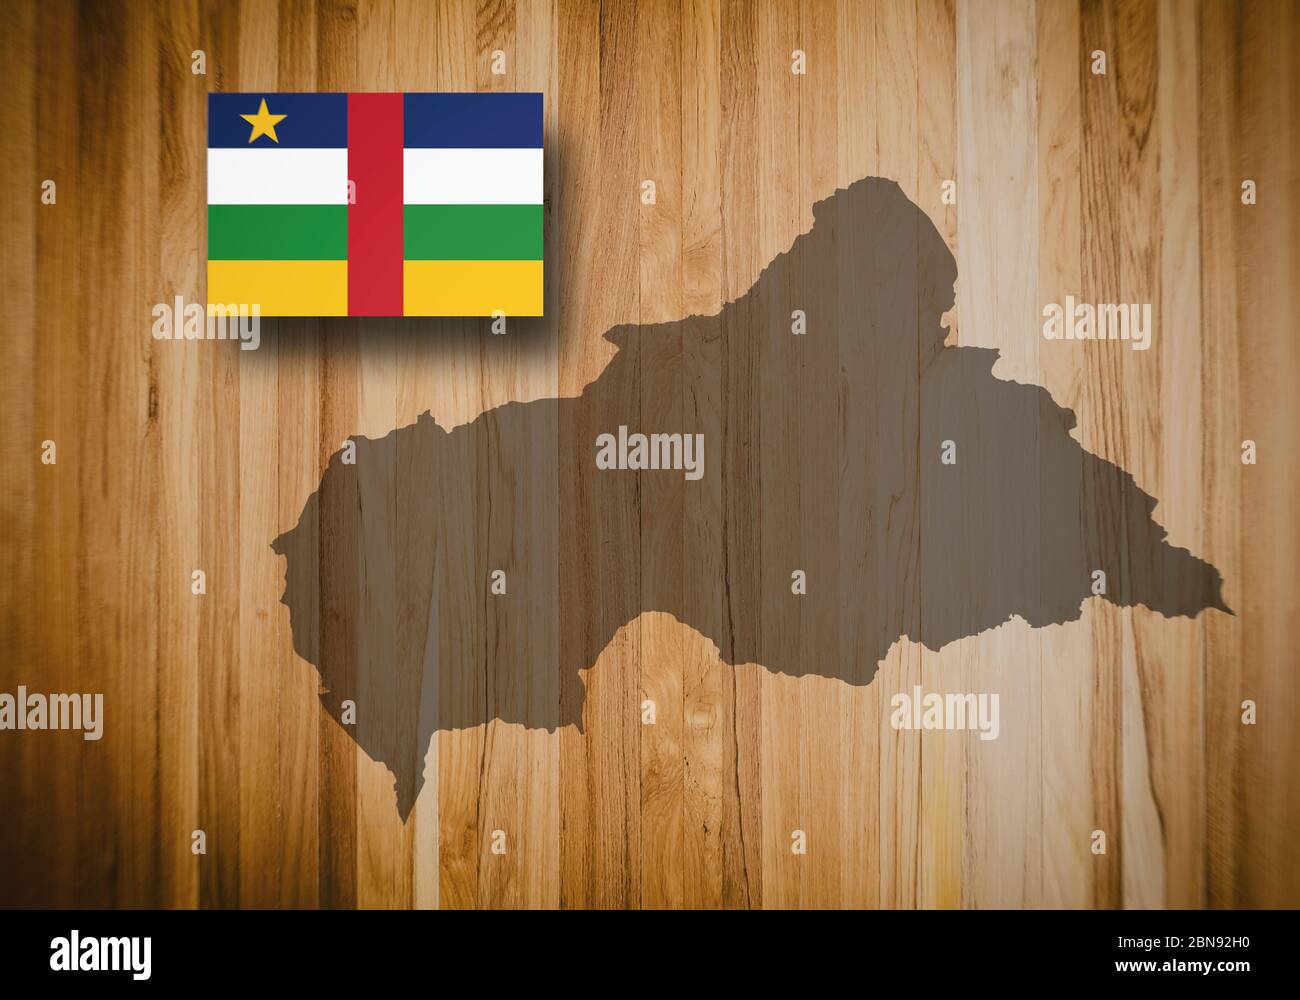 Map and flag of the Central African Republic on a wooden background. Stock Photo